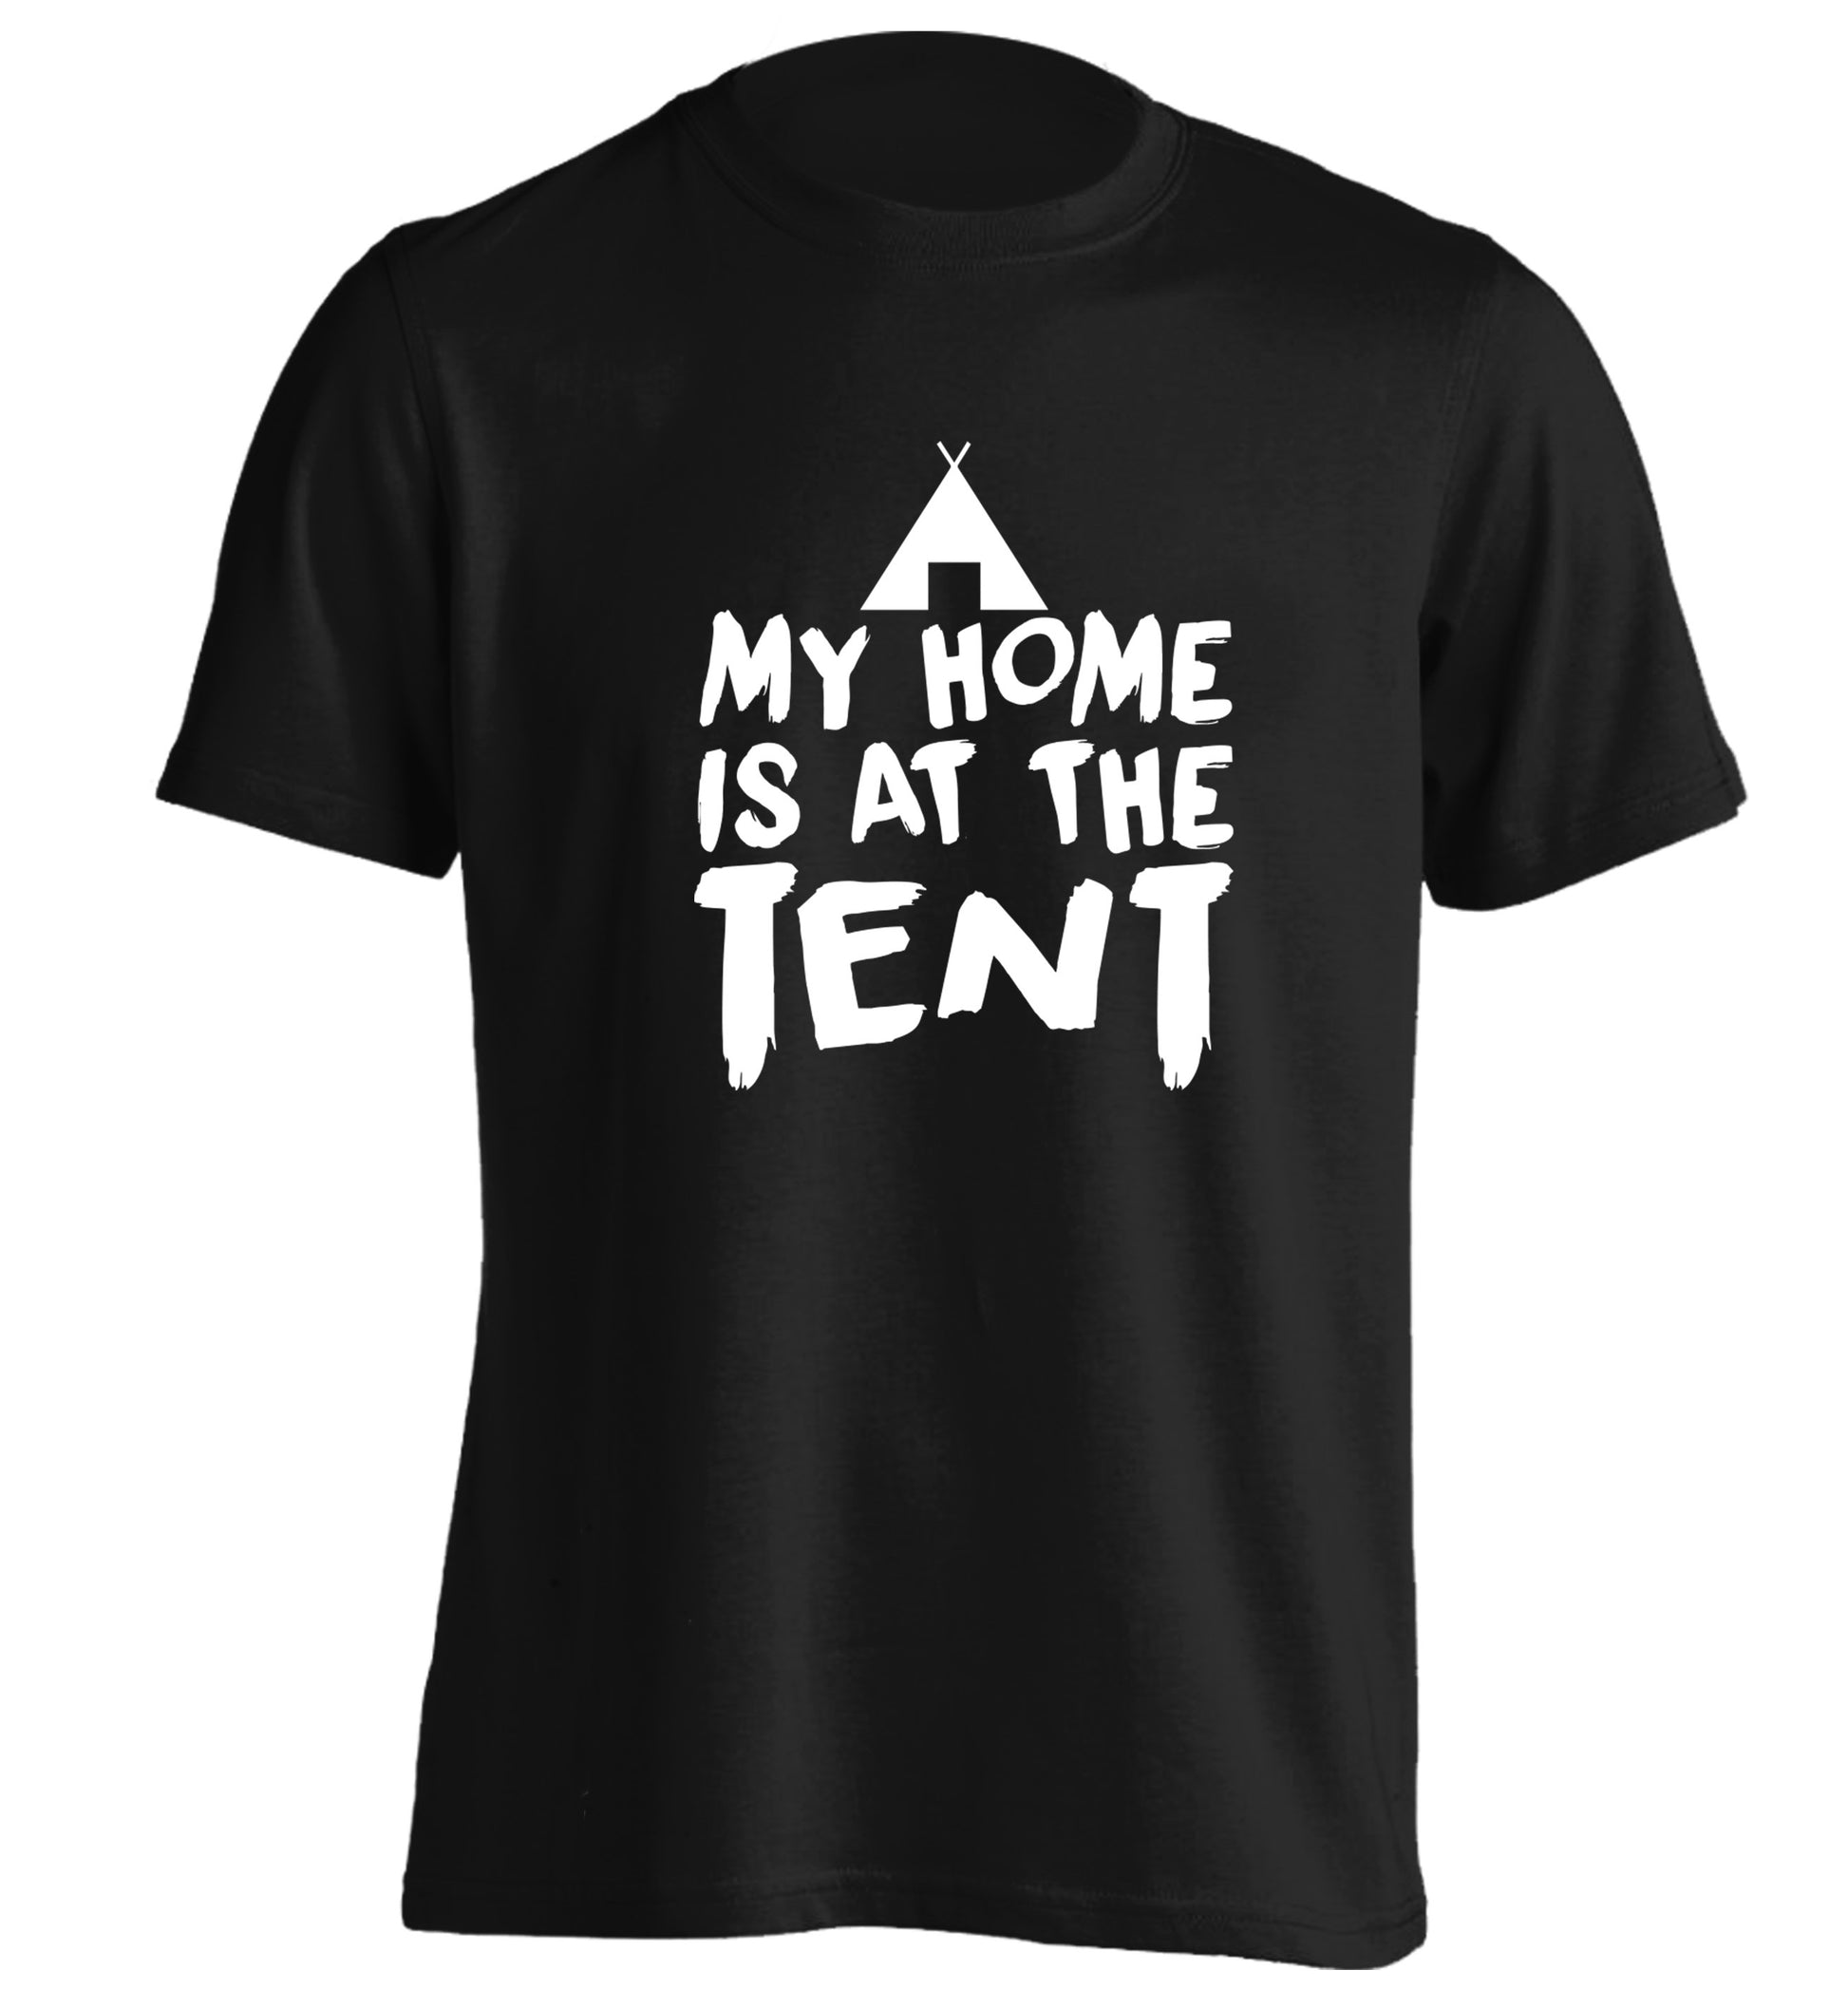 My home is at the tent adults unisex black Tshirt 2XL